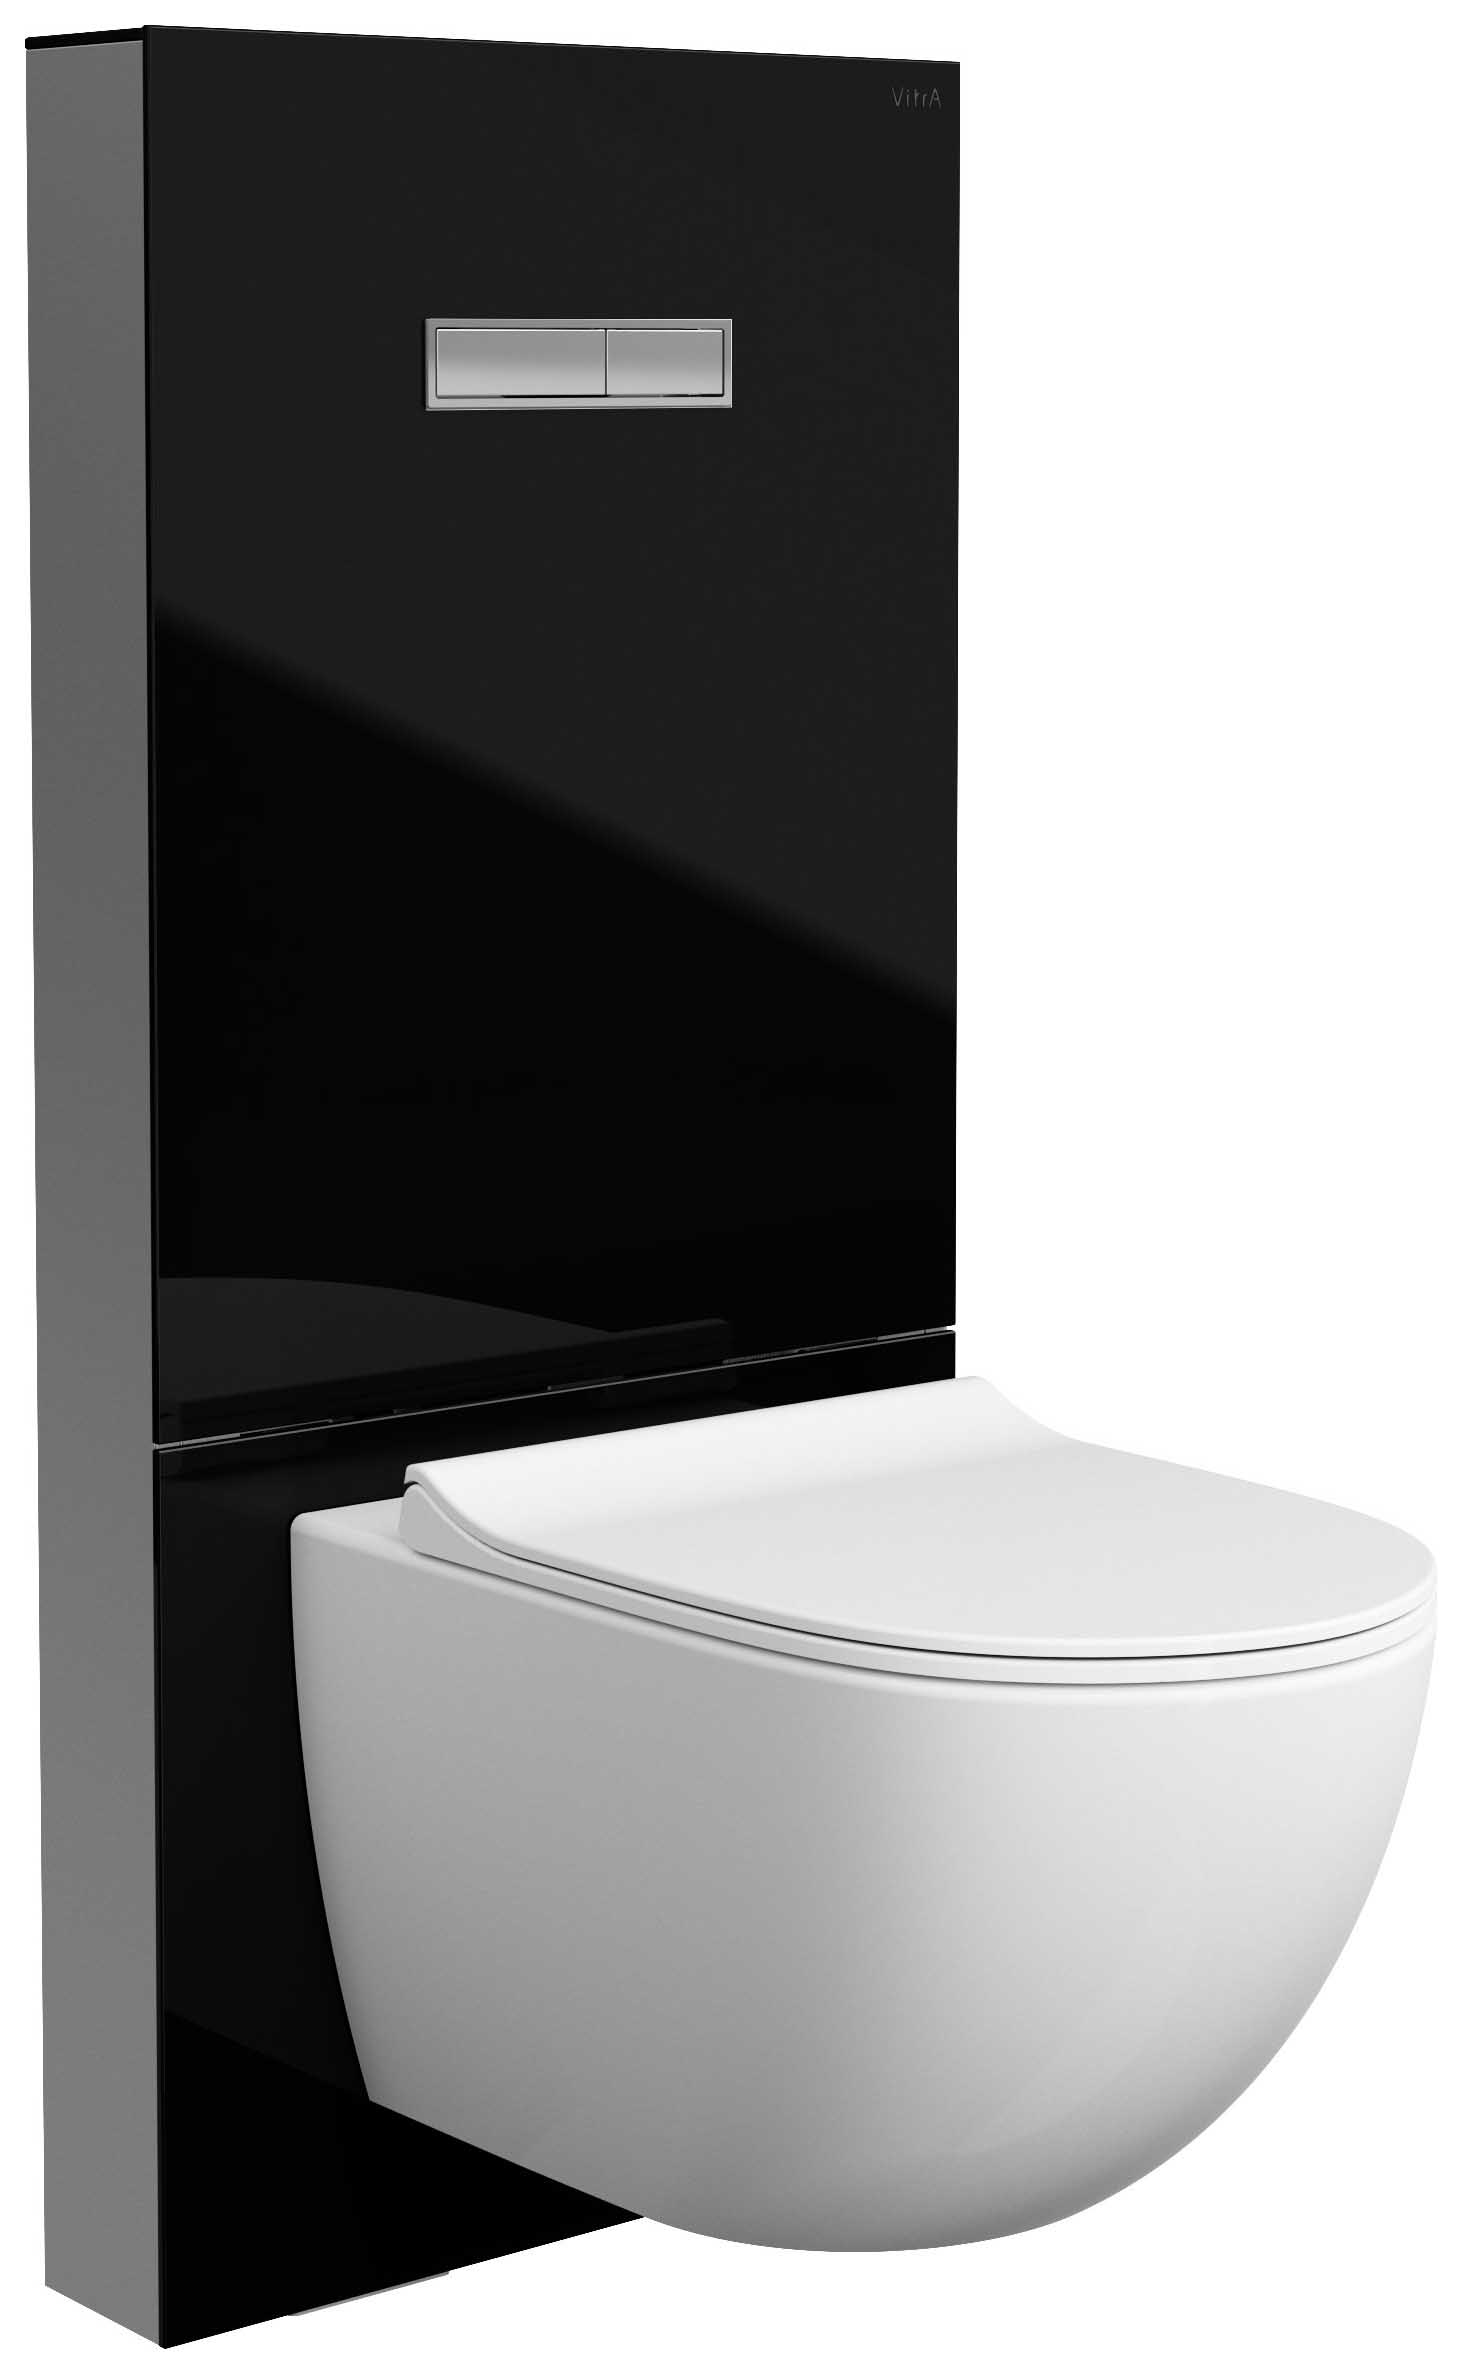 VitrA Vitrus Glass Surround Concealed Cistern for Wall Hung Toilet Pans - Black